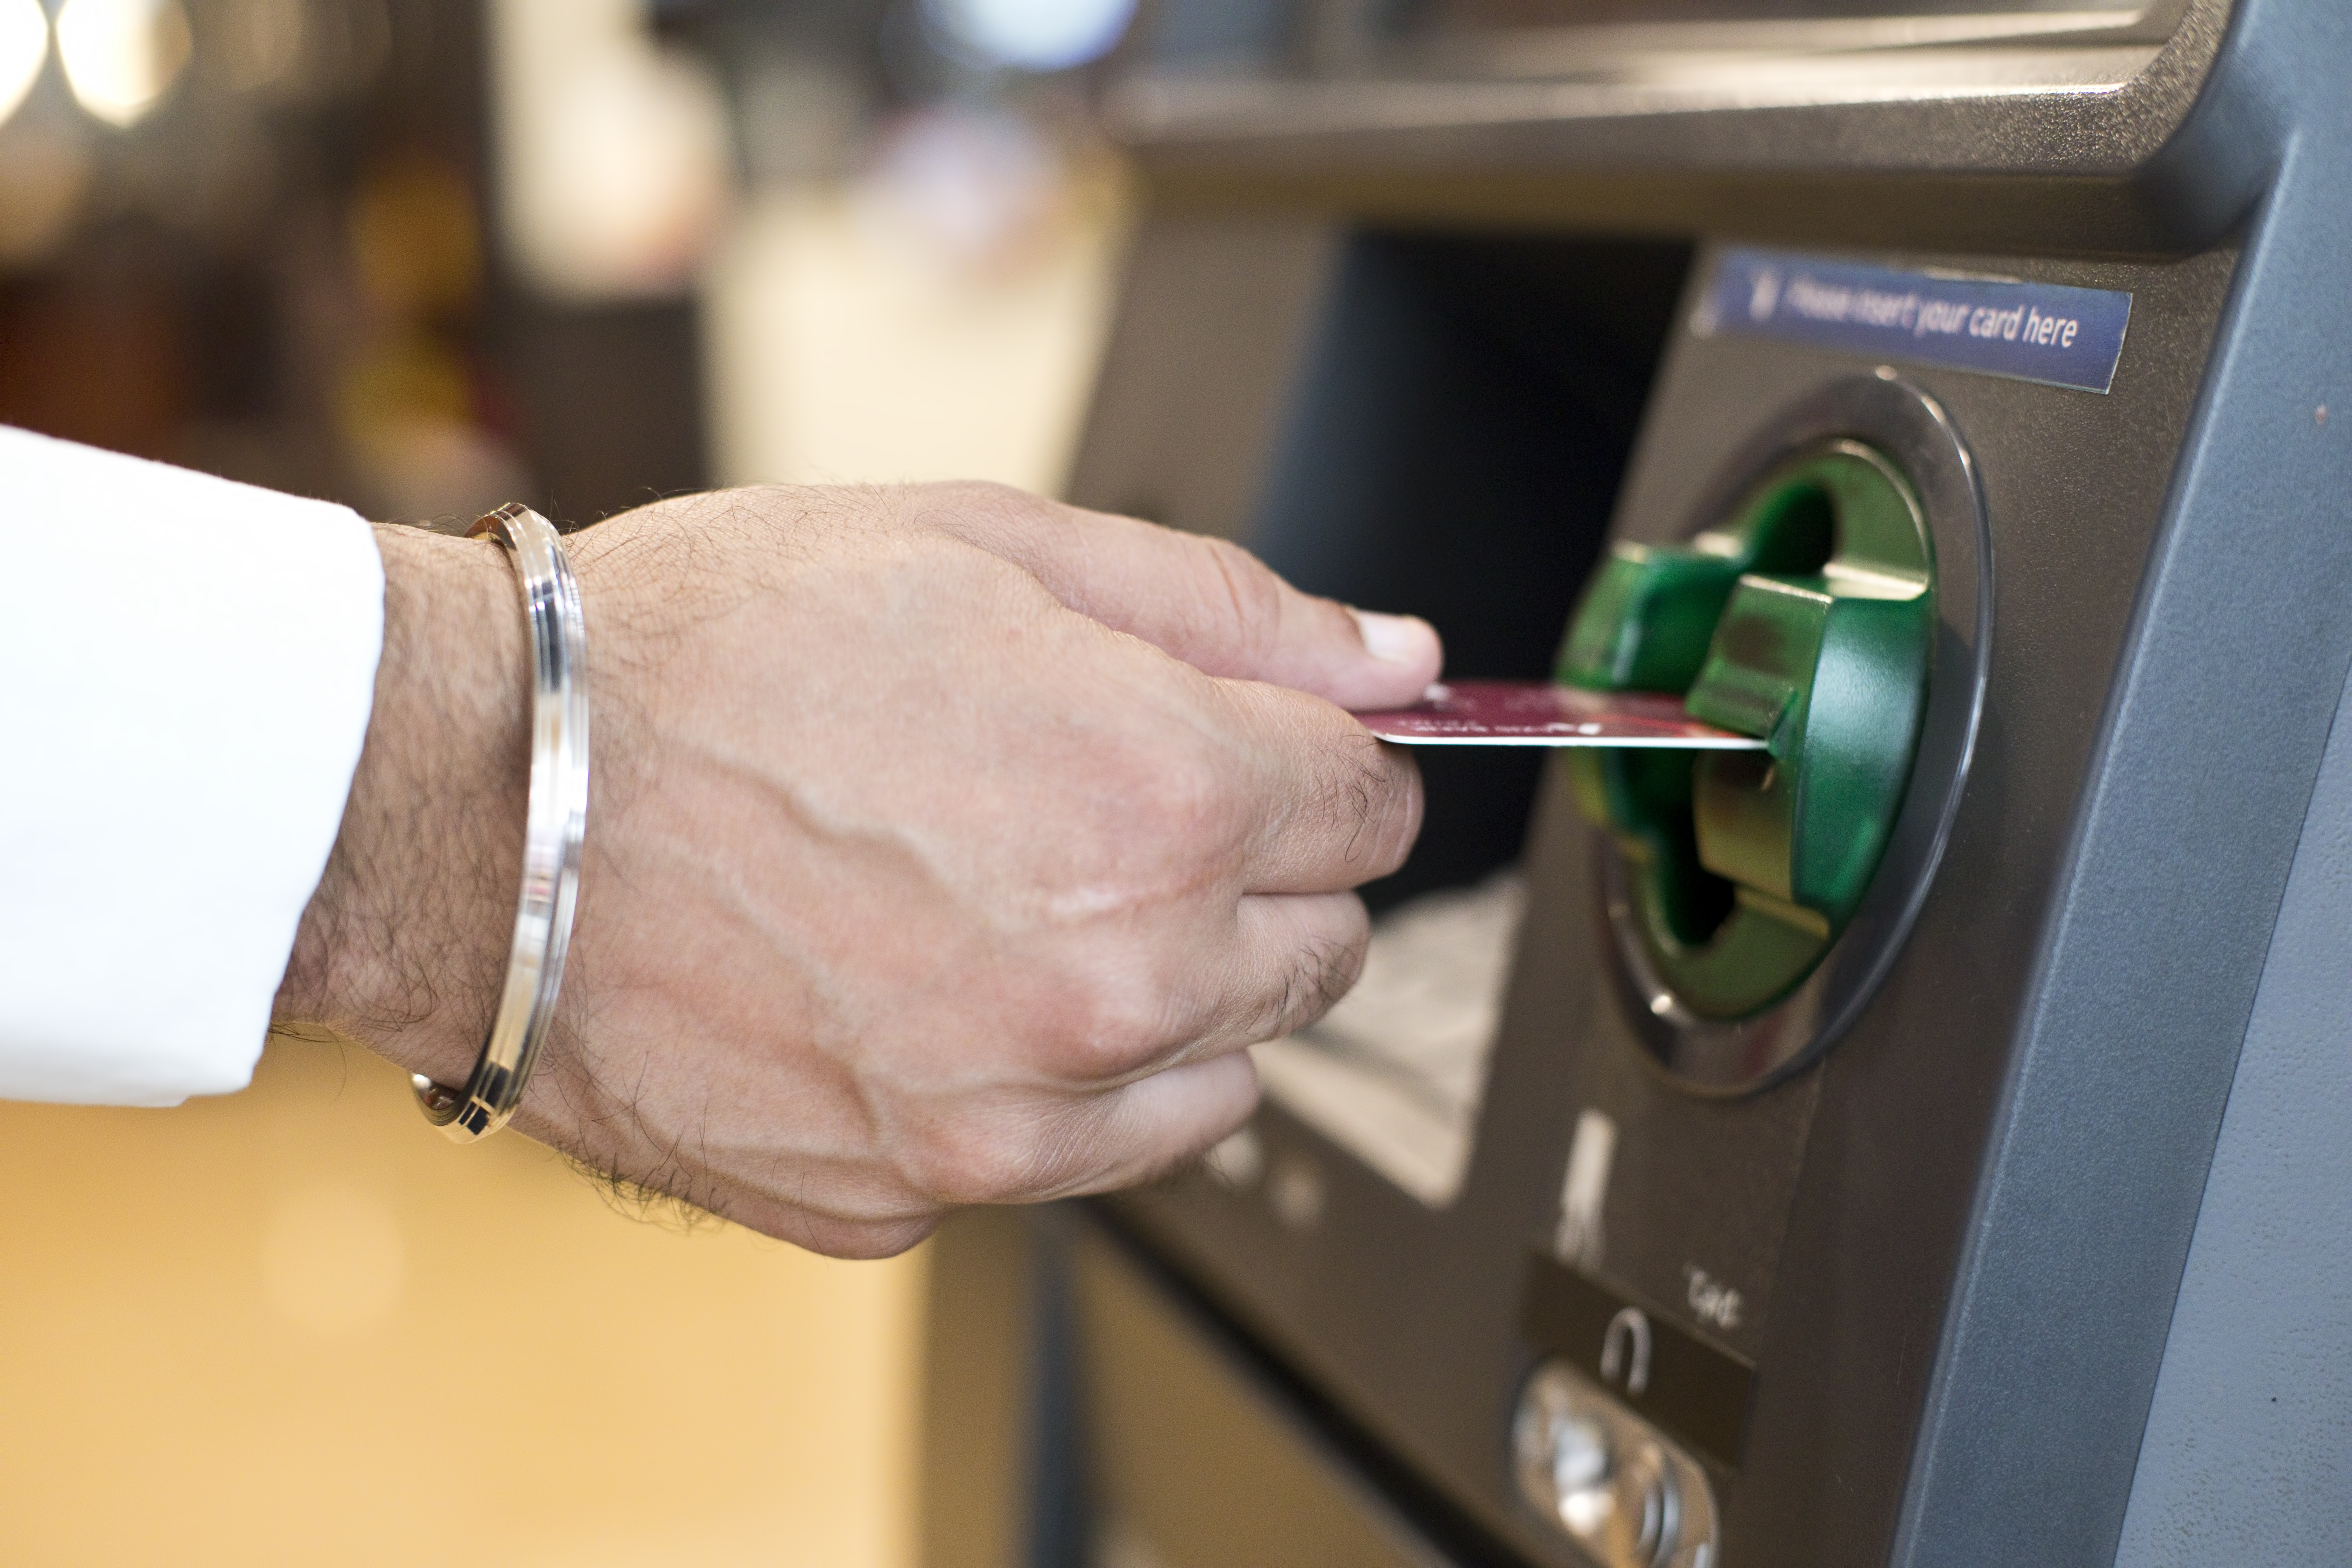 ATM Fees Hit All-Time Highs, Making It More Expensive Than Ever to Spend Your Own Money